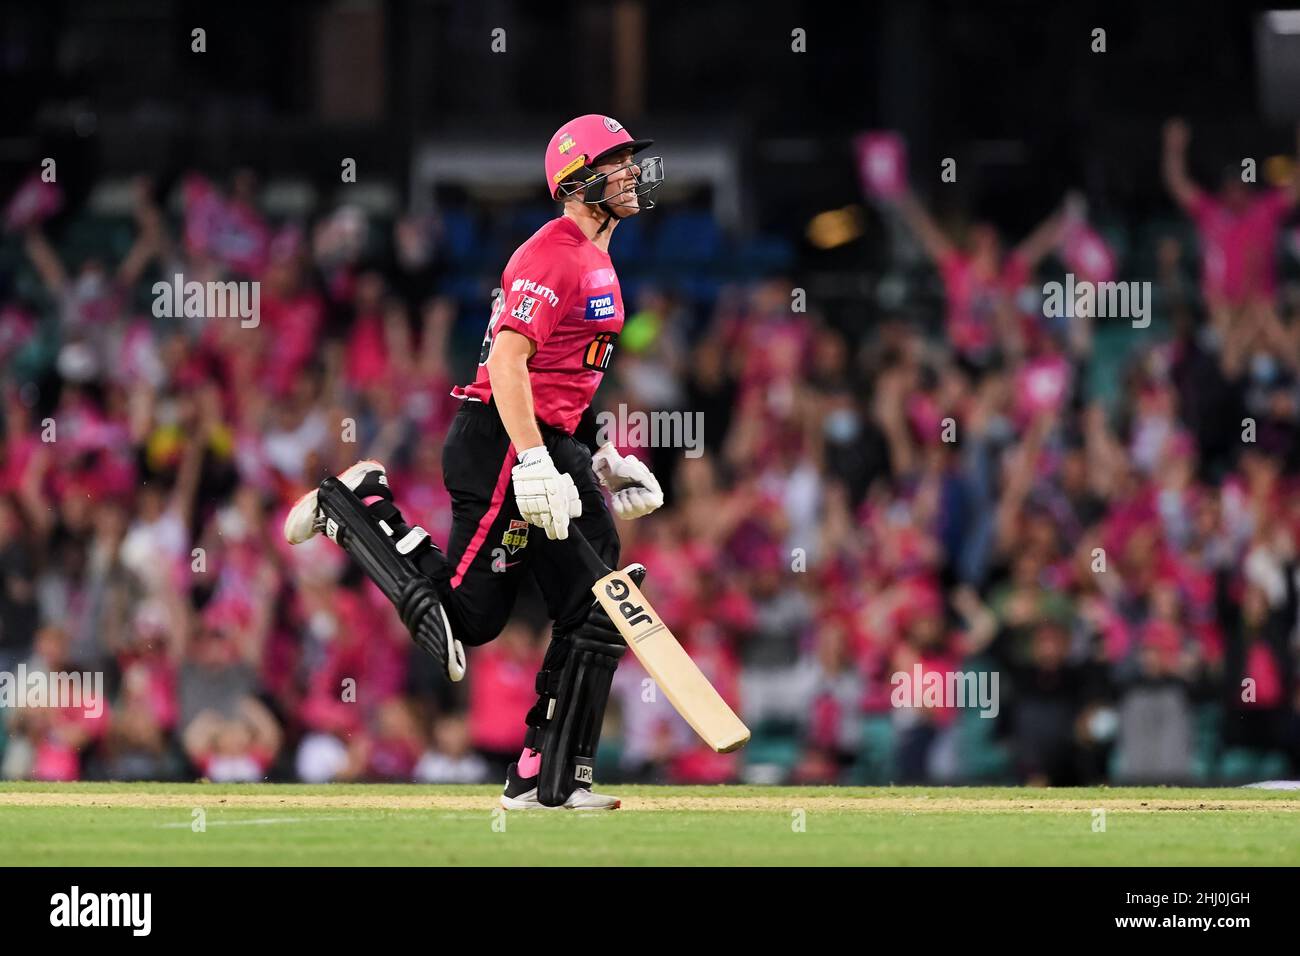 Sydney, Australia, 26 January, 2022. Hayden Kerr of the Sixers scores the winning runs during the Big Bash League Challenger cricket match between Sydney Sixers and Adelaide Strikers at The Sydney Cricket Ground on January 26, 2022 in Sydney, Australia. Credit: Steven Markham/Speed Media/Alamy Live News Stock Photo